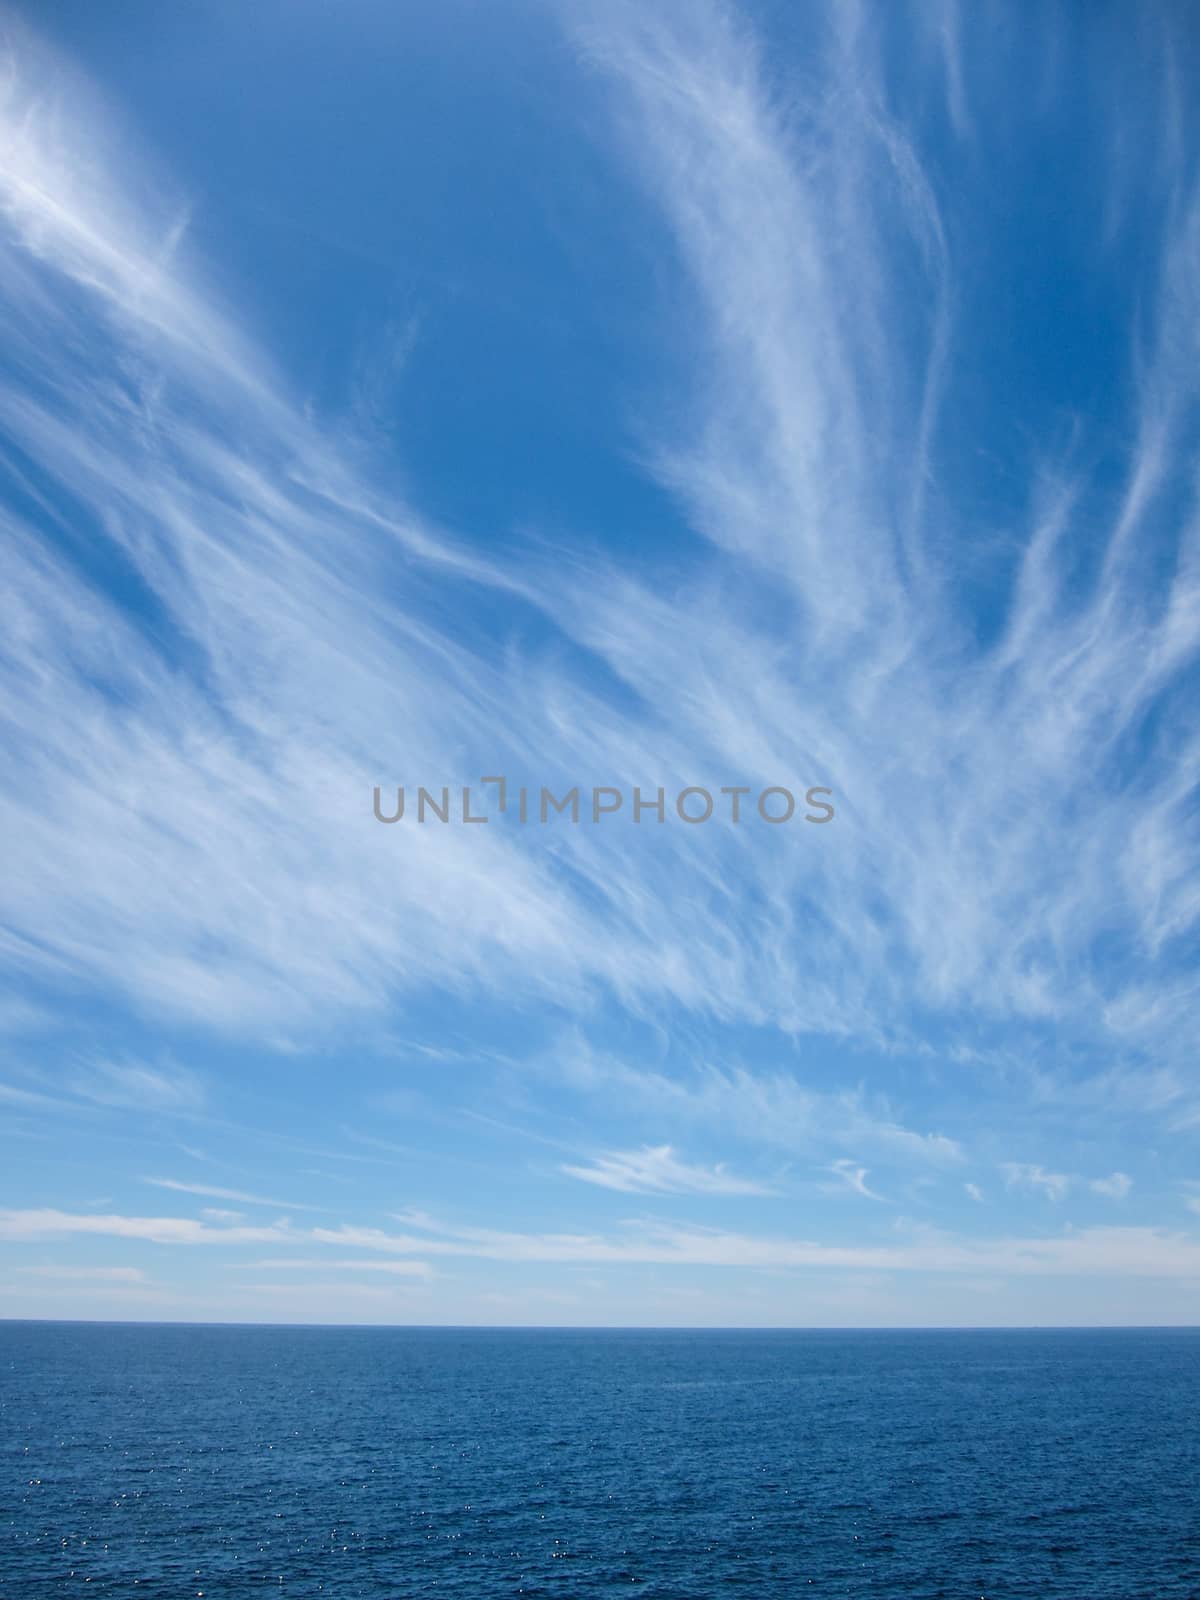 Wndy Clouds On The Evening Sky by underworld